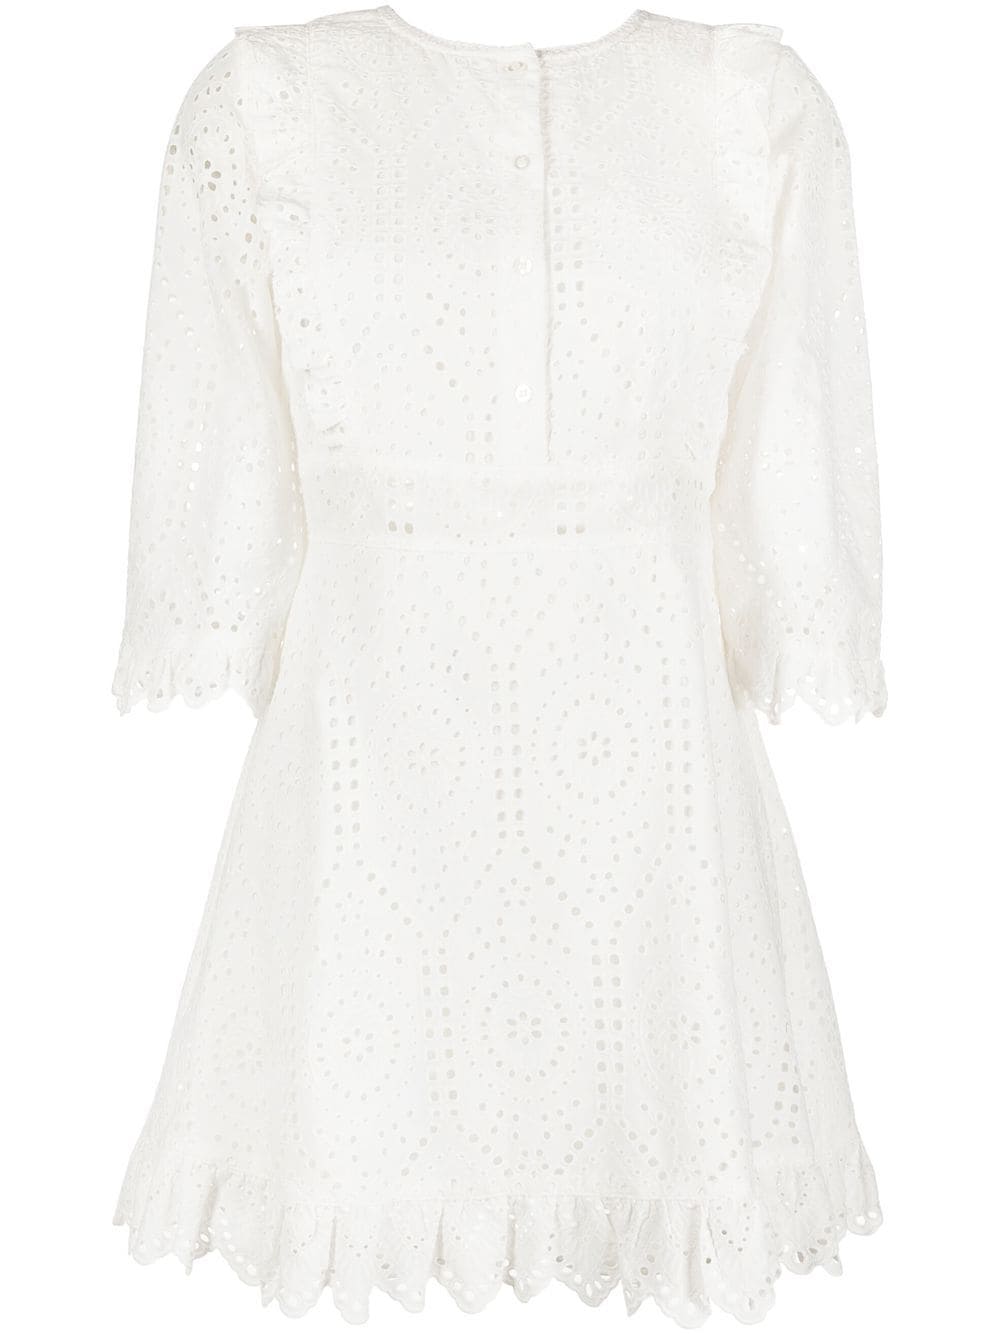 TWINSET broderie anglaise shirt dress - White von TWINSET